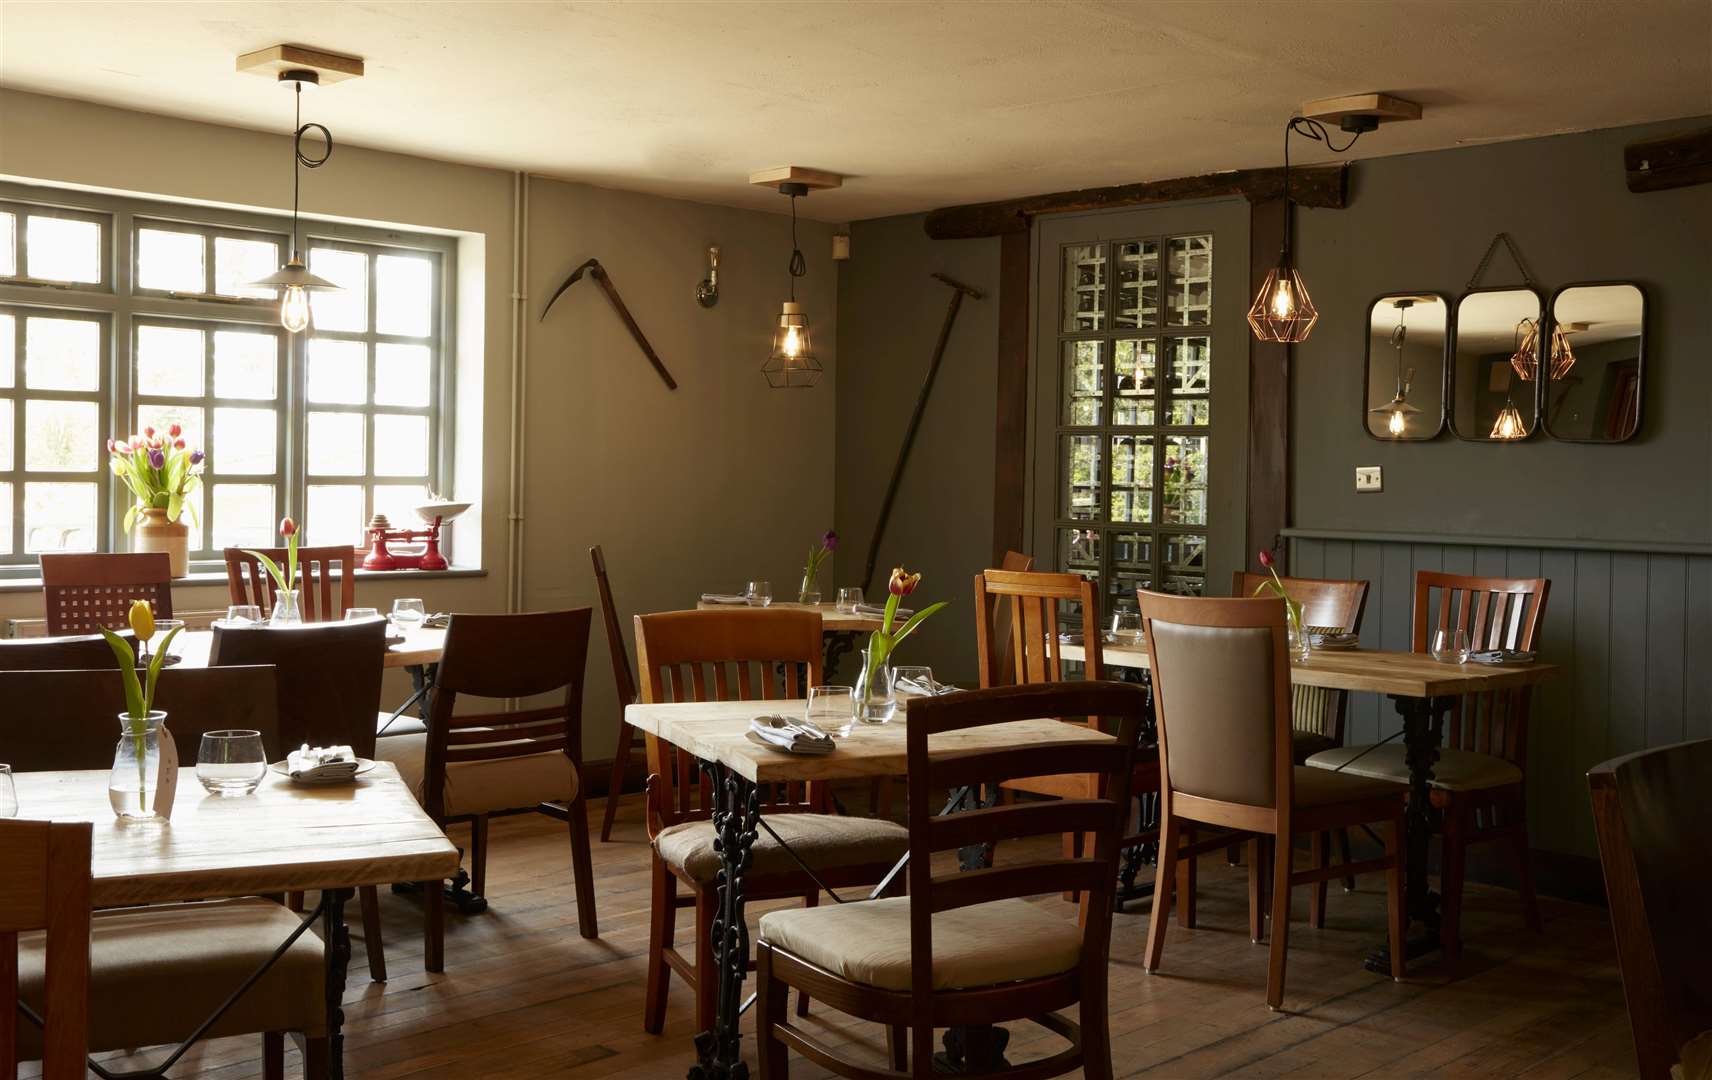 The Small Holding in Goudhurst. Picture: SWNS